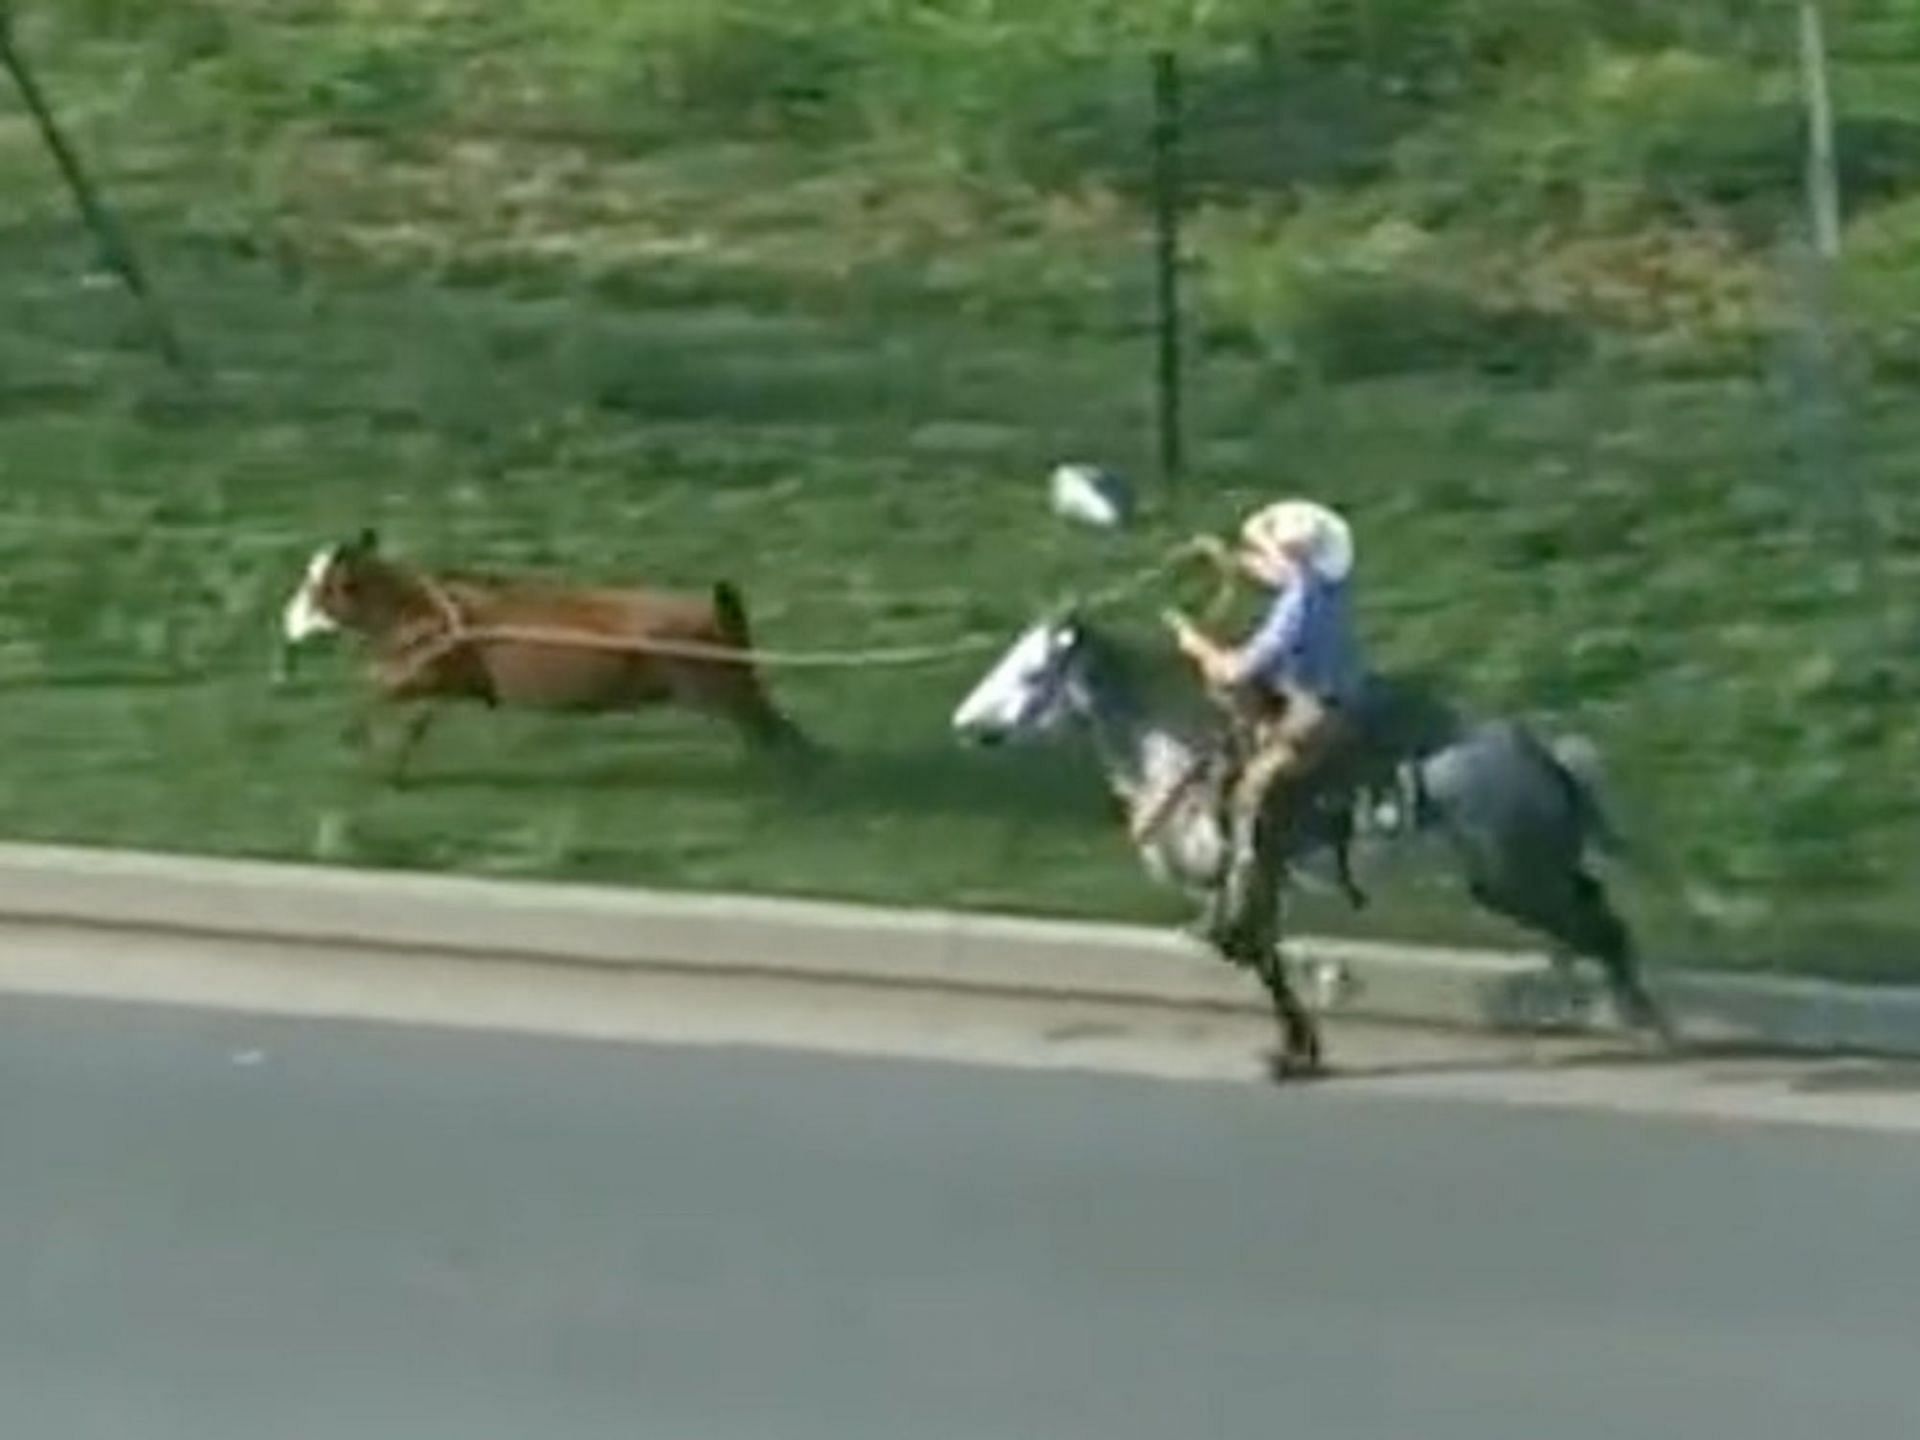 Cowboys capture cow on the loose on highway (Image via koconews/Twitter)